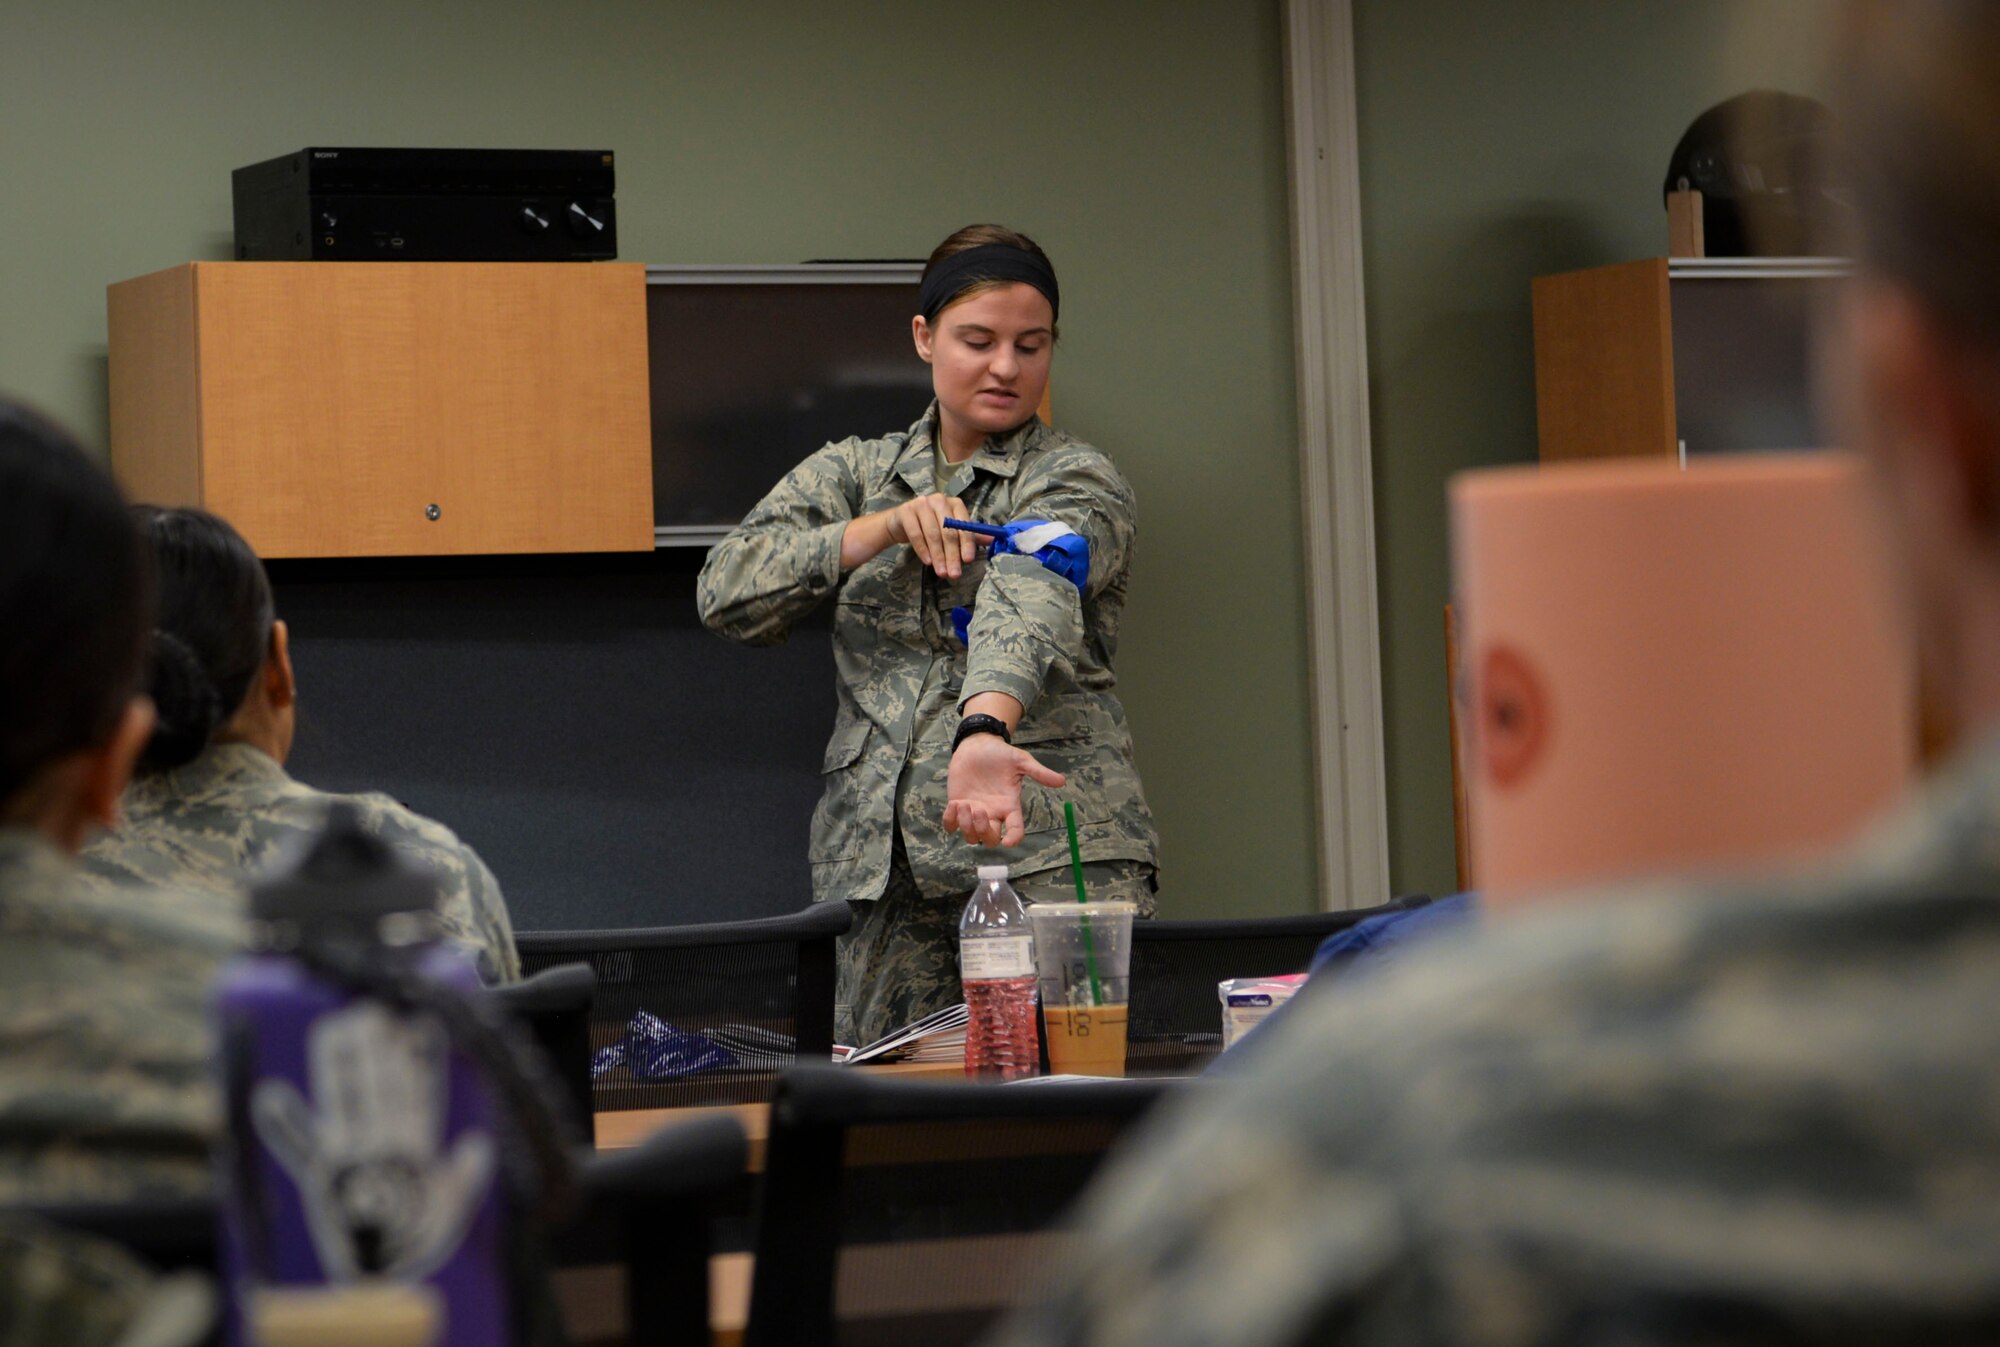 1st Lt. Caitlin Totman, 99th Inpatient Operations Squadron registered nurse, demonstrates how to properly use a tourniquet at Mike O’Callaghan Military Medical Center on Nellis Air Force Base, Nevada, June 22, 2018. The course stresses the mechanisms of the body and how bleeding can be drastically decreased by focusing on the three main methods of hemorrhage control: compression, tourniquet use and wound packing. (U.S. Air Force Photo by Airman Bailee A. Darbasie)